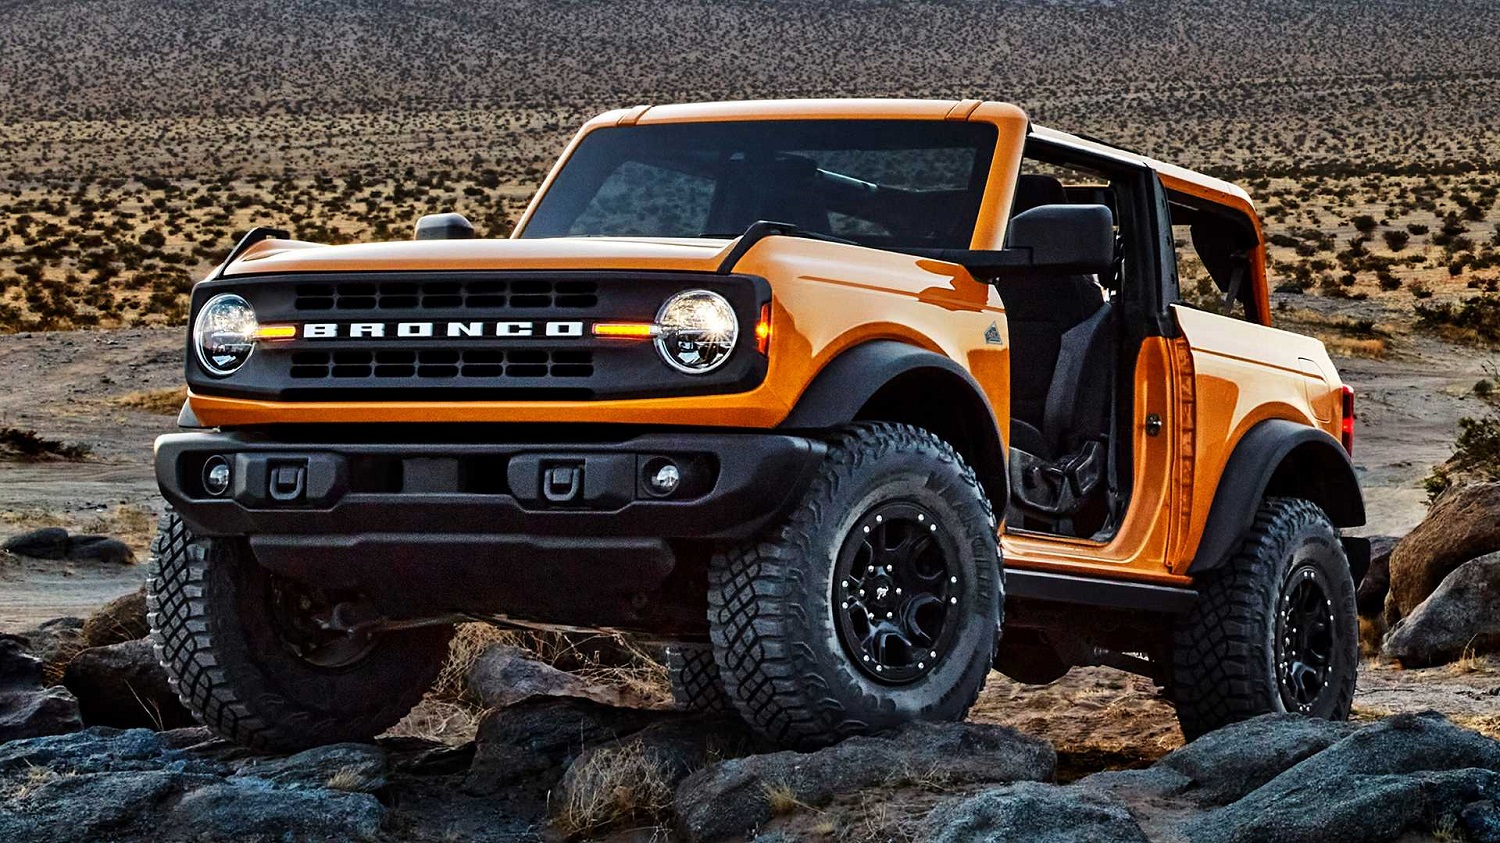 Goodyear To Remove 'Wrangler' Logo From 2021 Bronco Tires